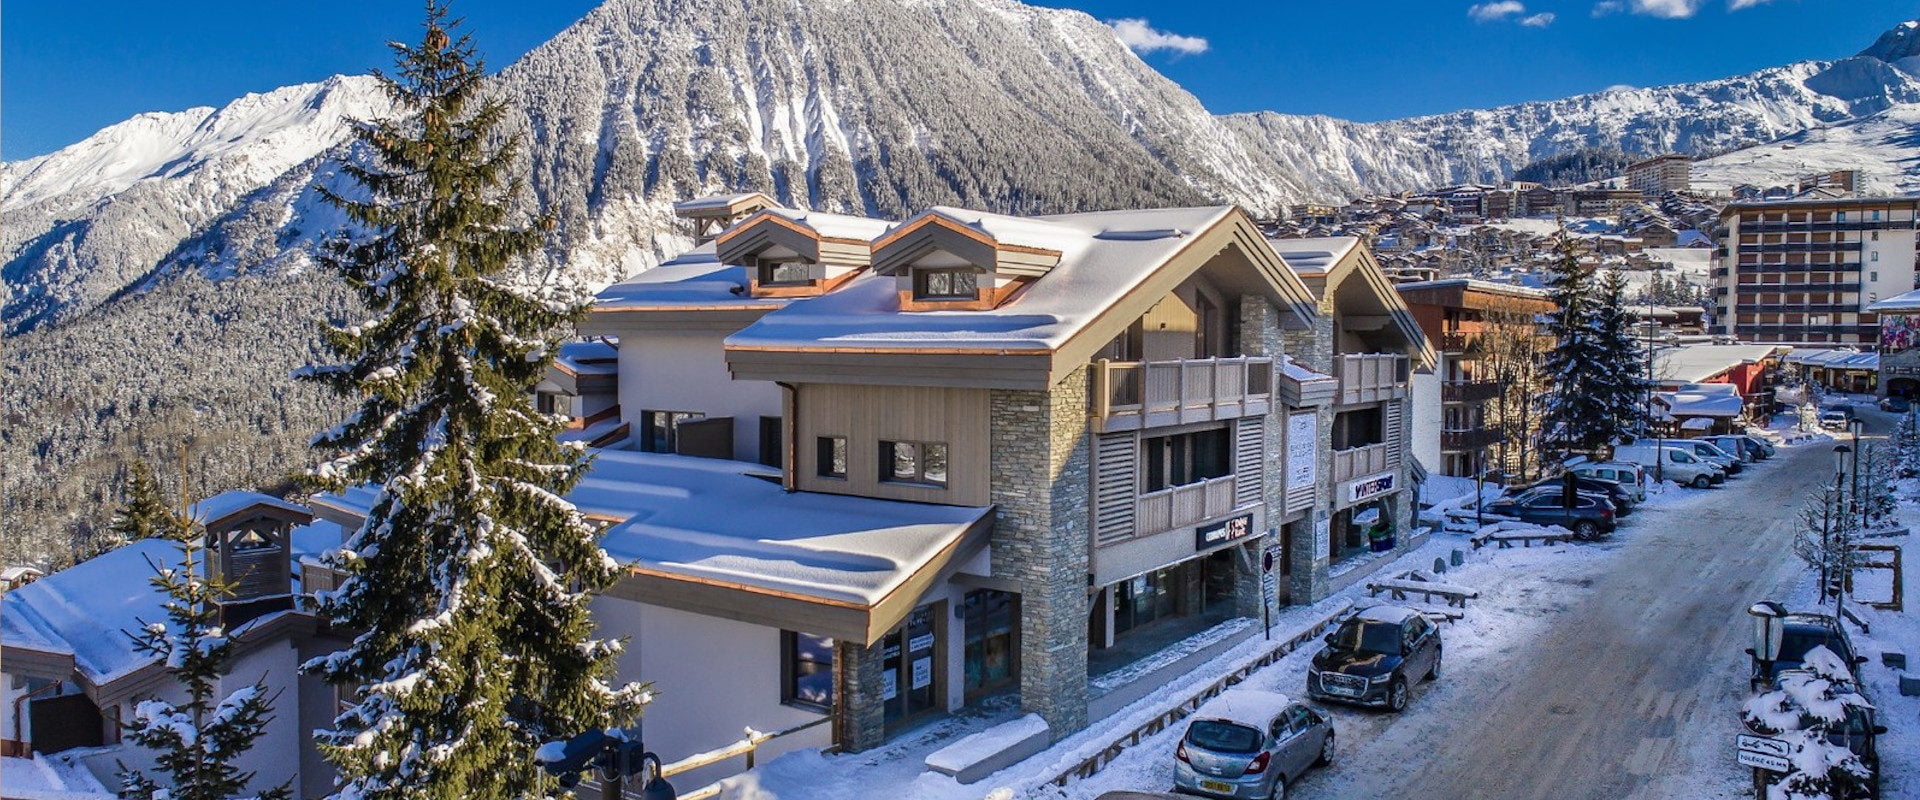 2 Bed Apartment For Sale in Courchevel Village, France